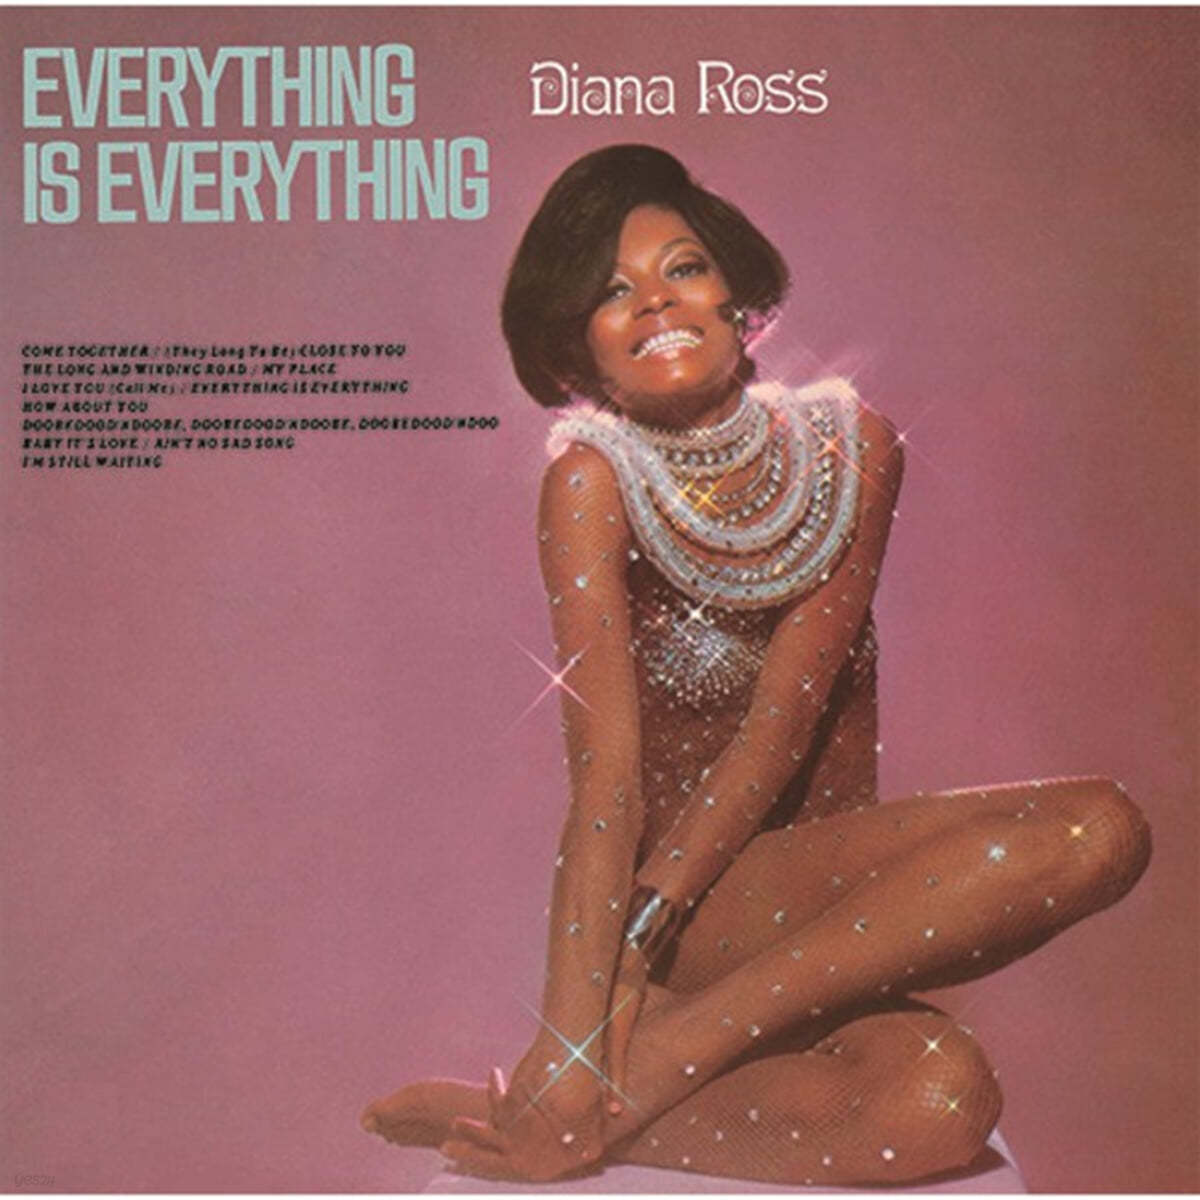 Diana Ross (다이아나 로스) - Everything Is Everything 